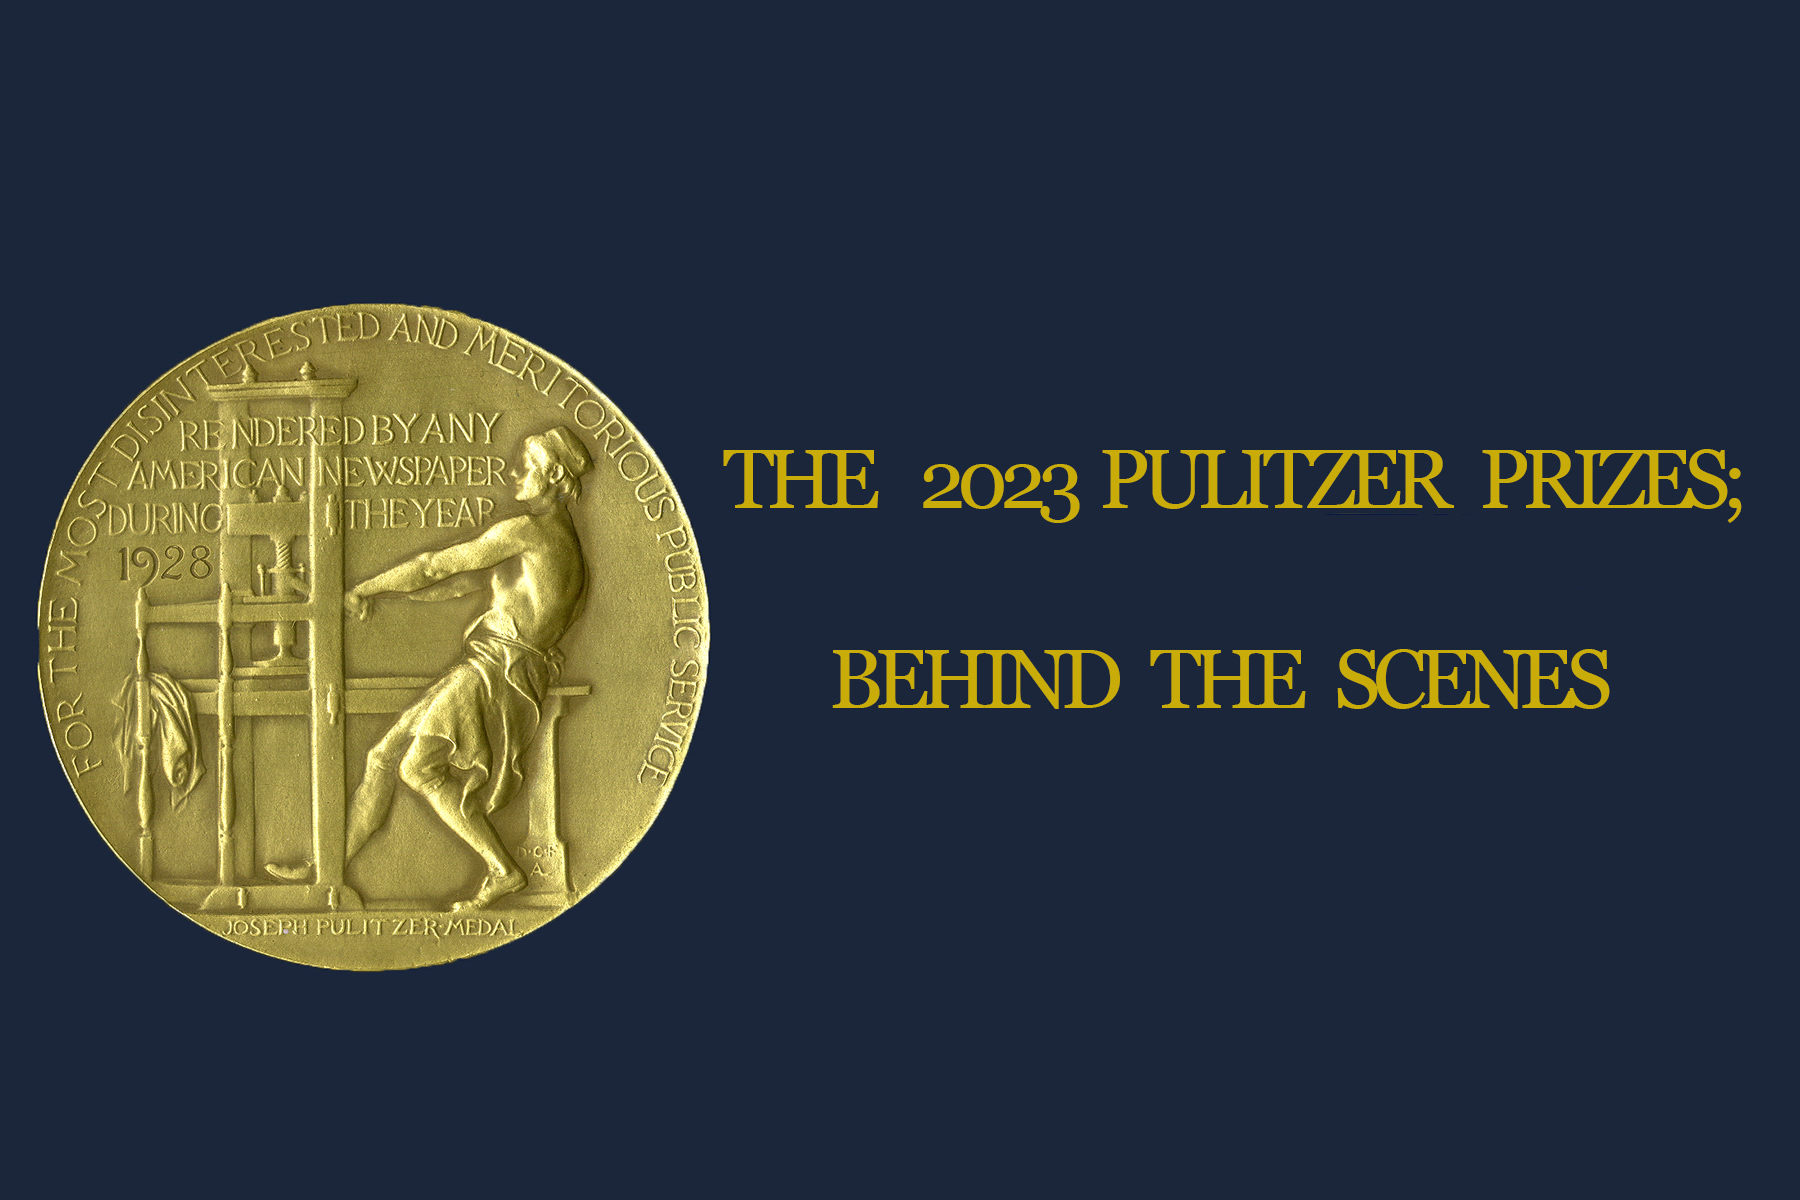 The 2023 Pulitzer Prizes Behind the Scenes The Pulitzer Prizes